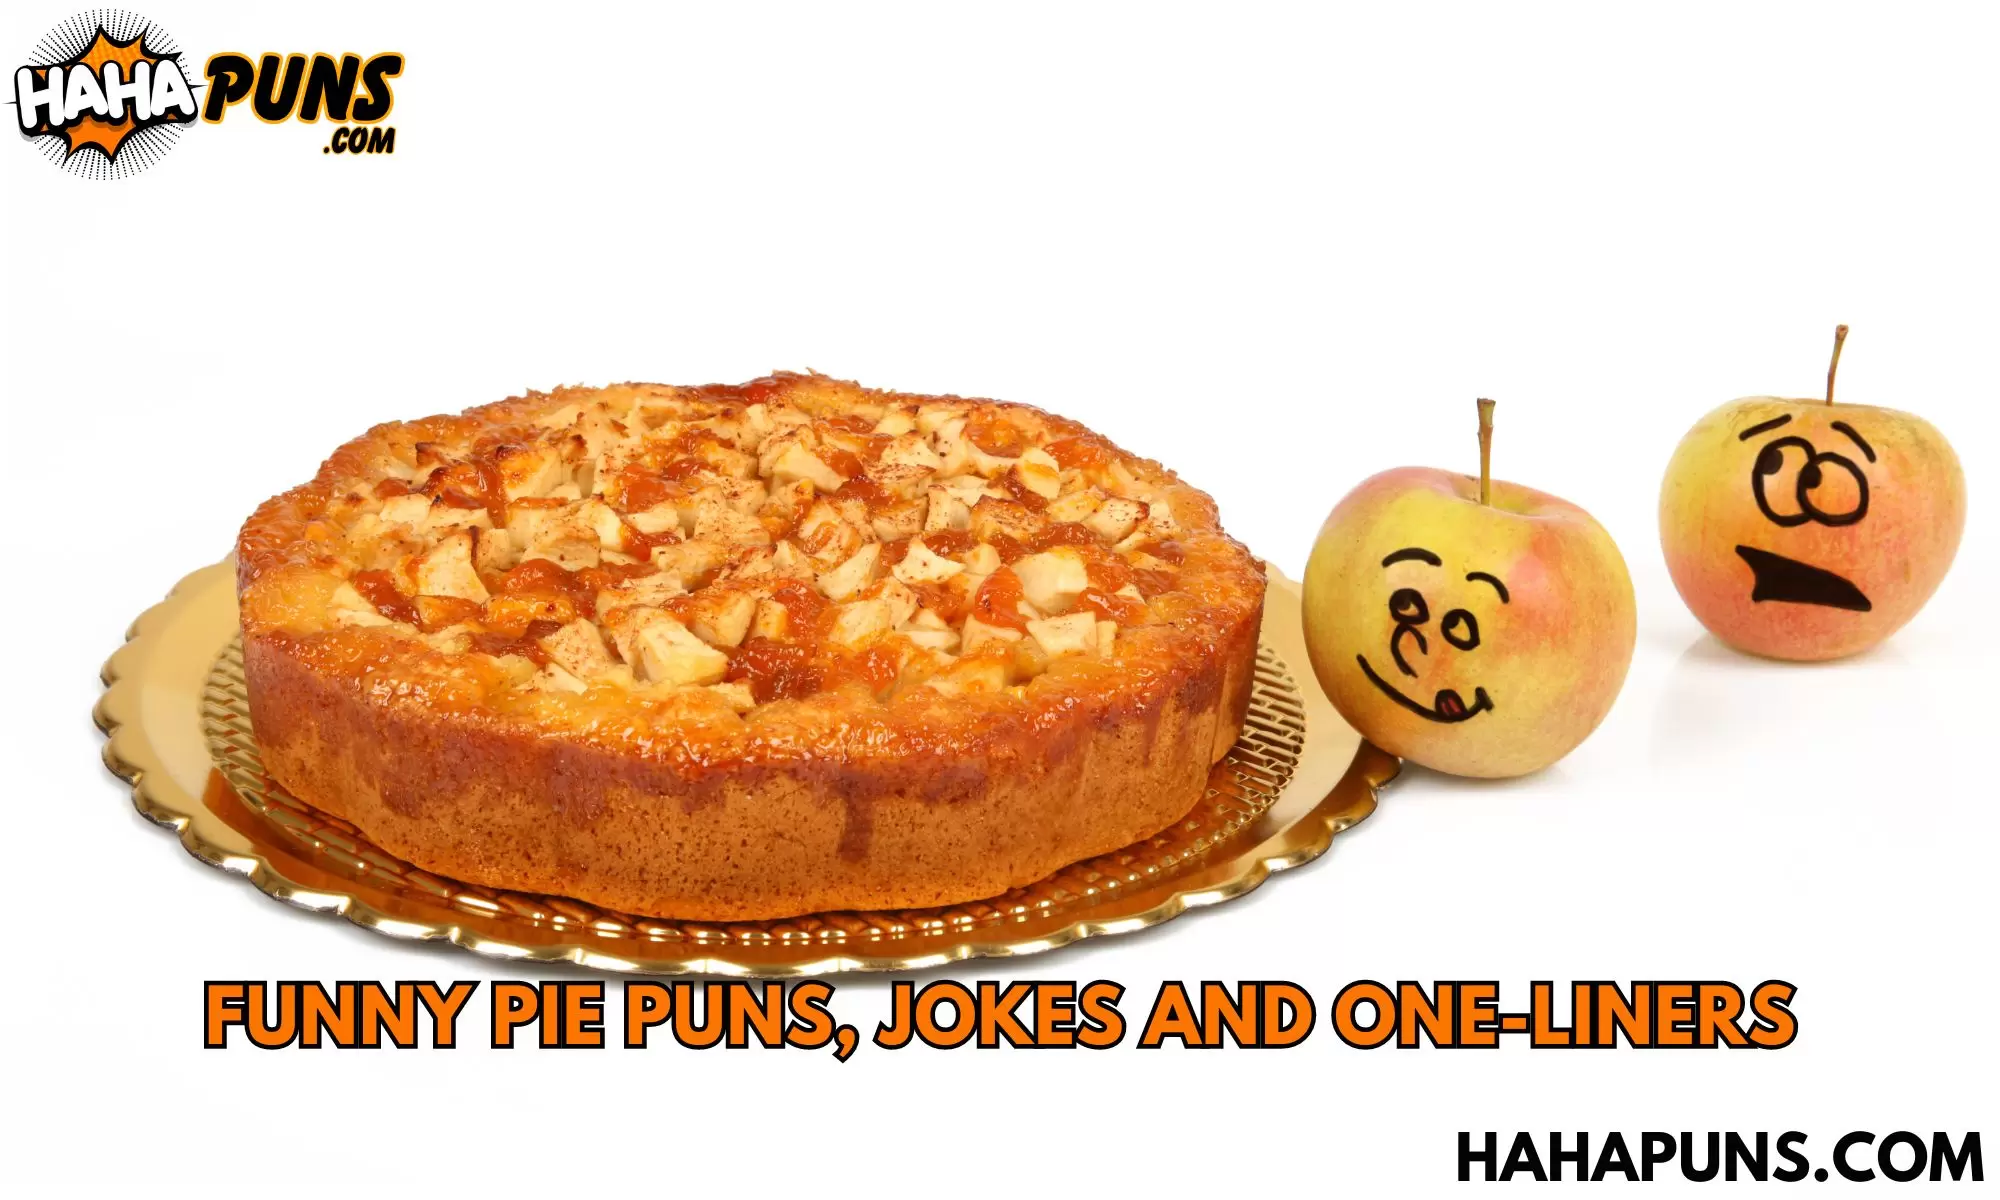 Funny Pie Puns, Jokes And One-Liners